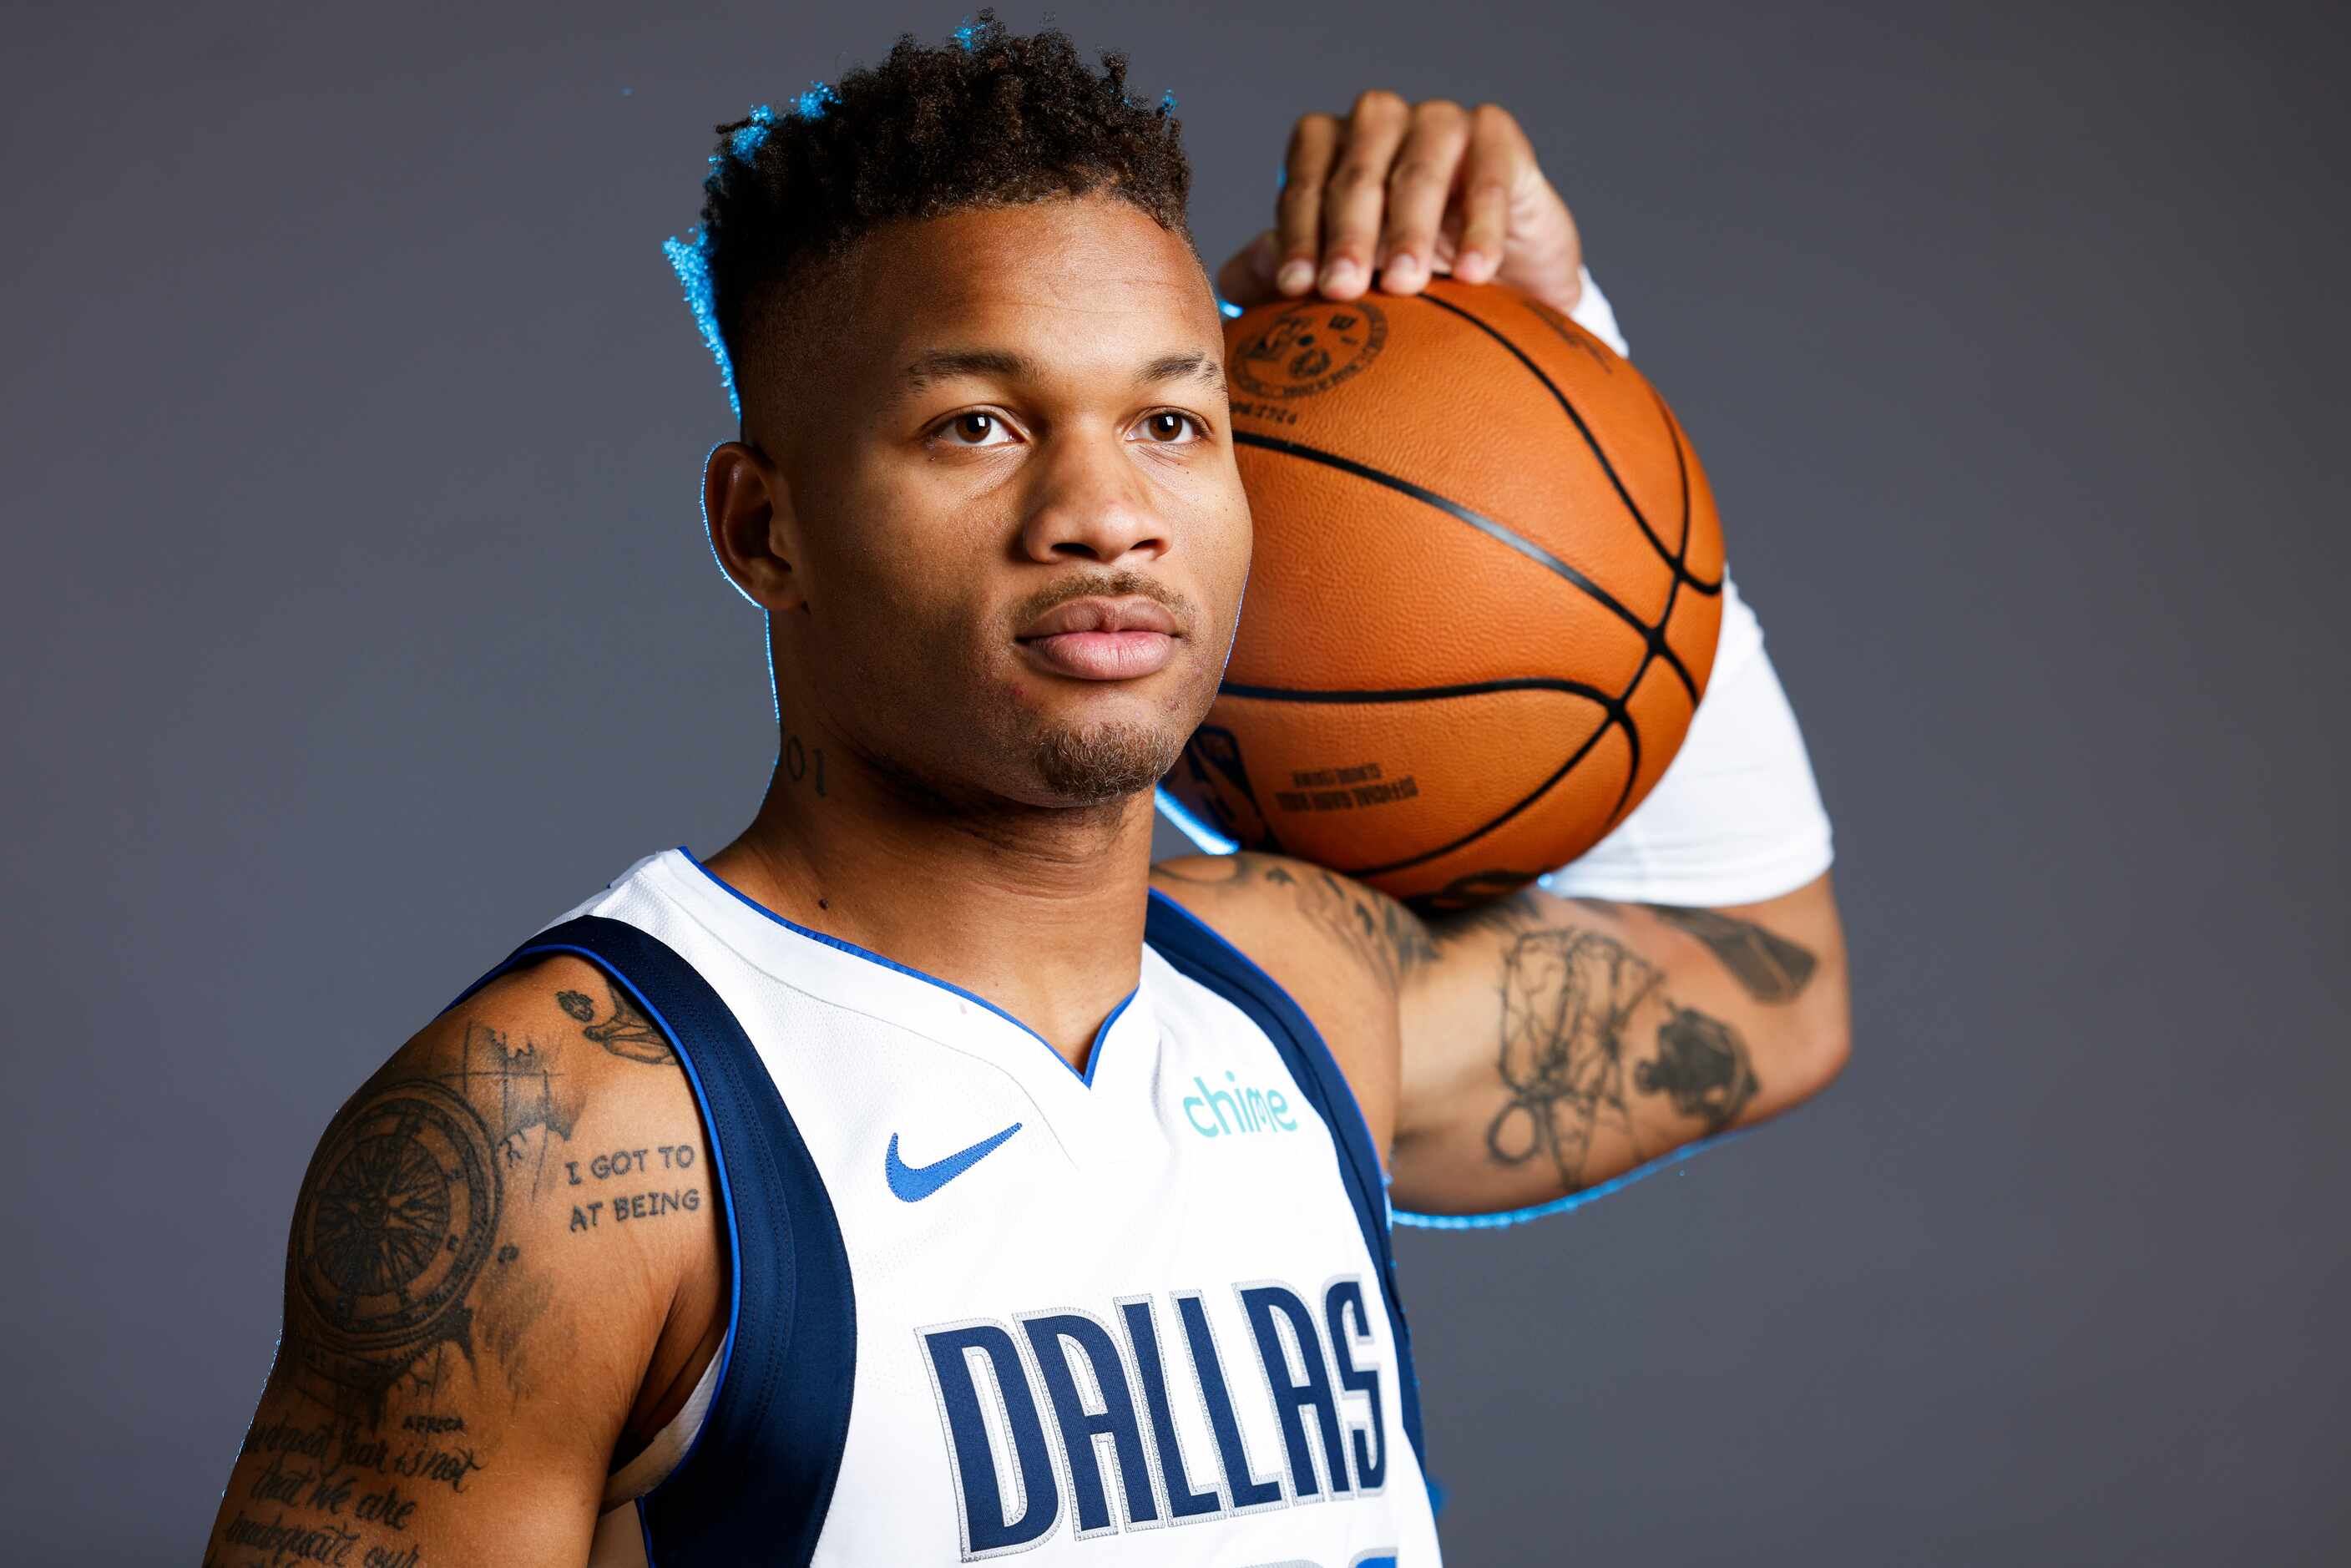 Dallas Mavericks guard Dexter Dennis poses for a photo during the media day on Friday, Sept....